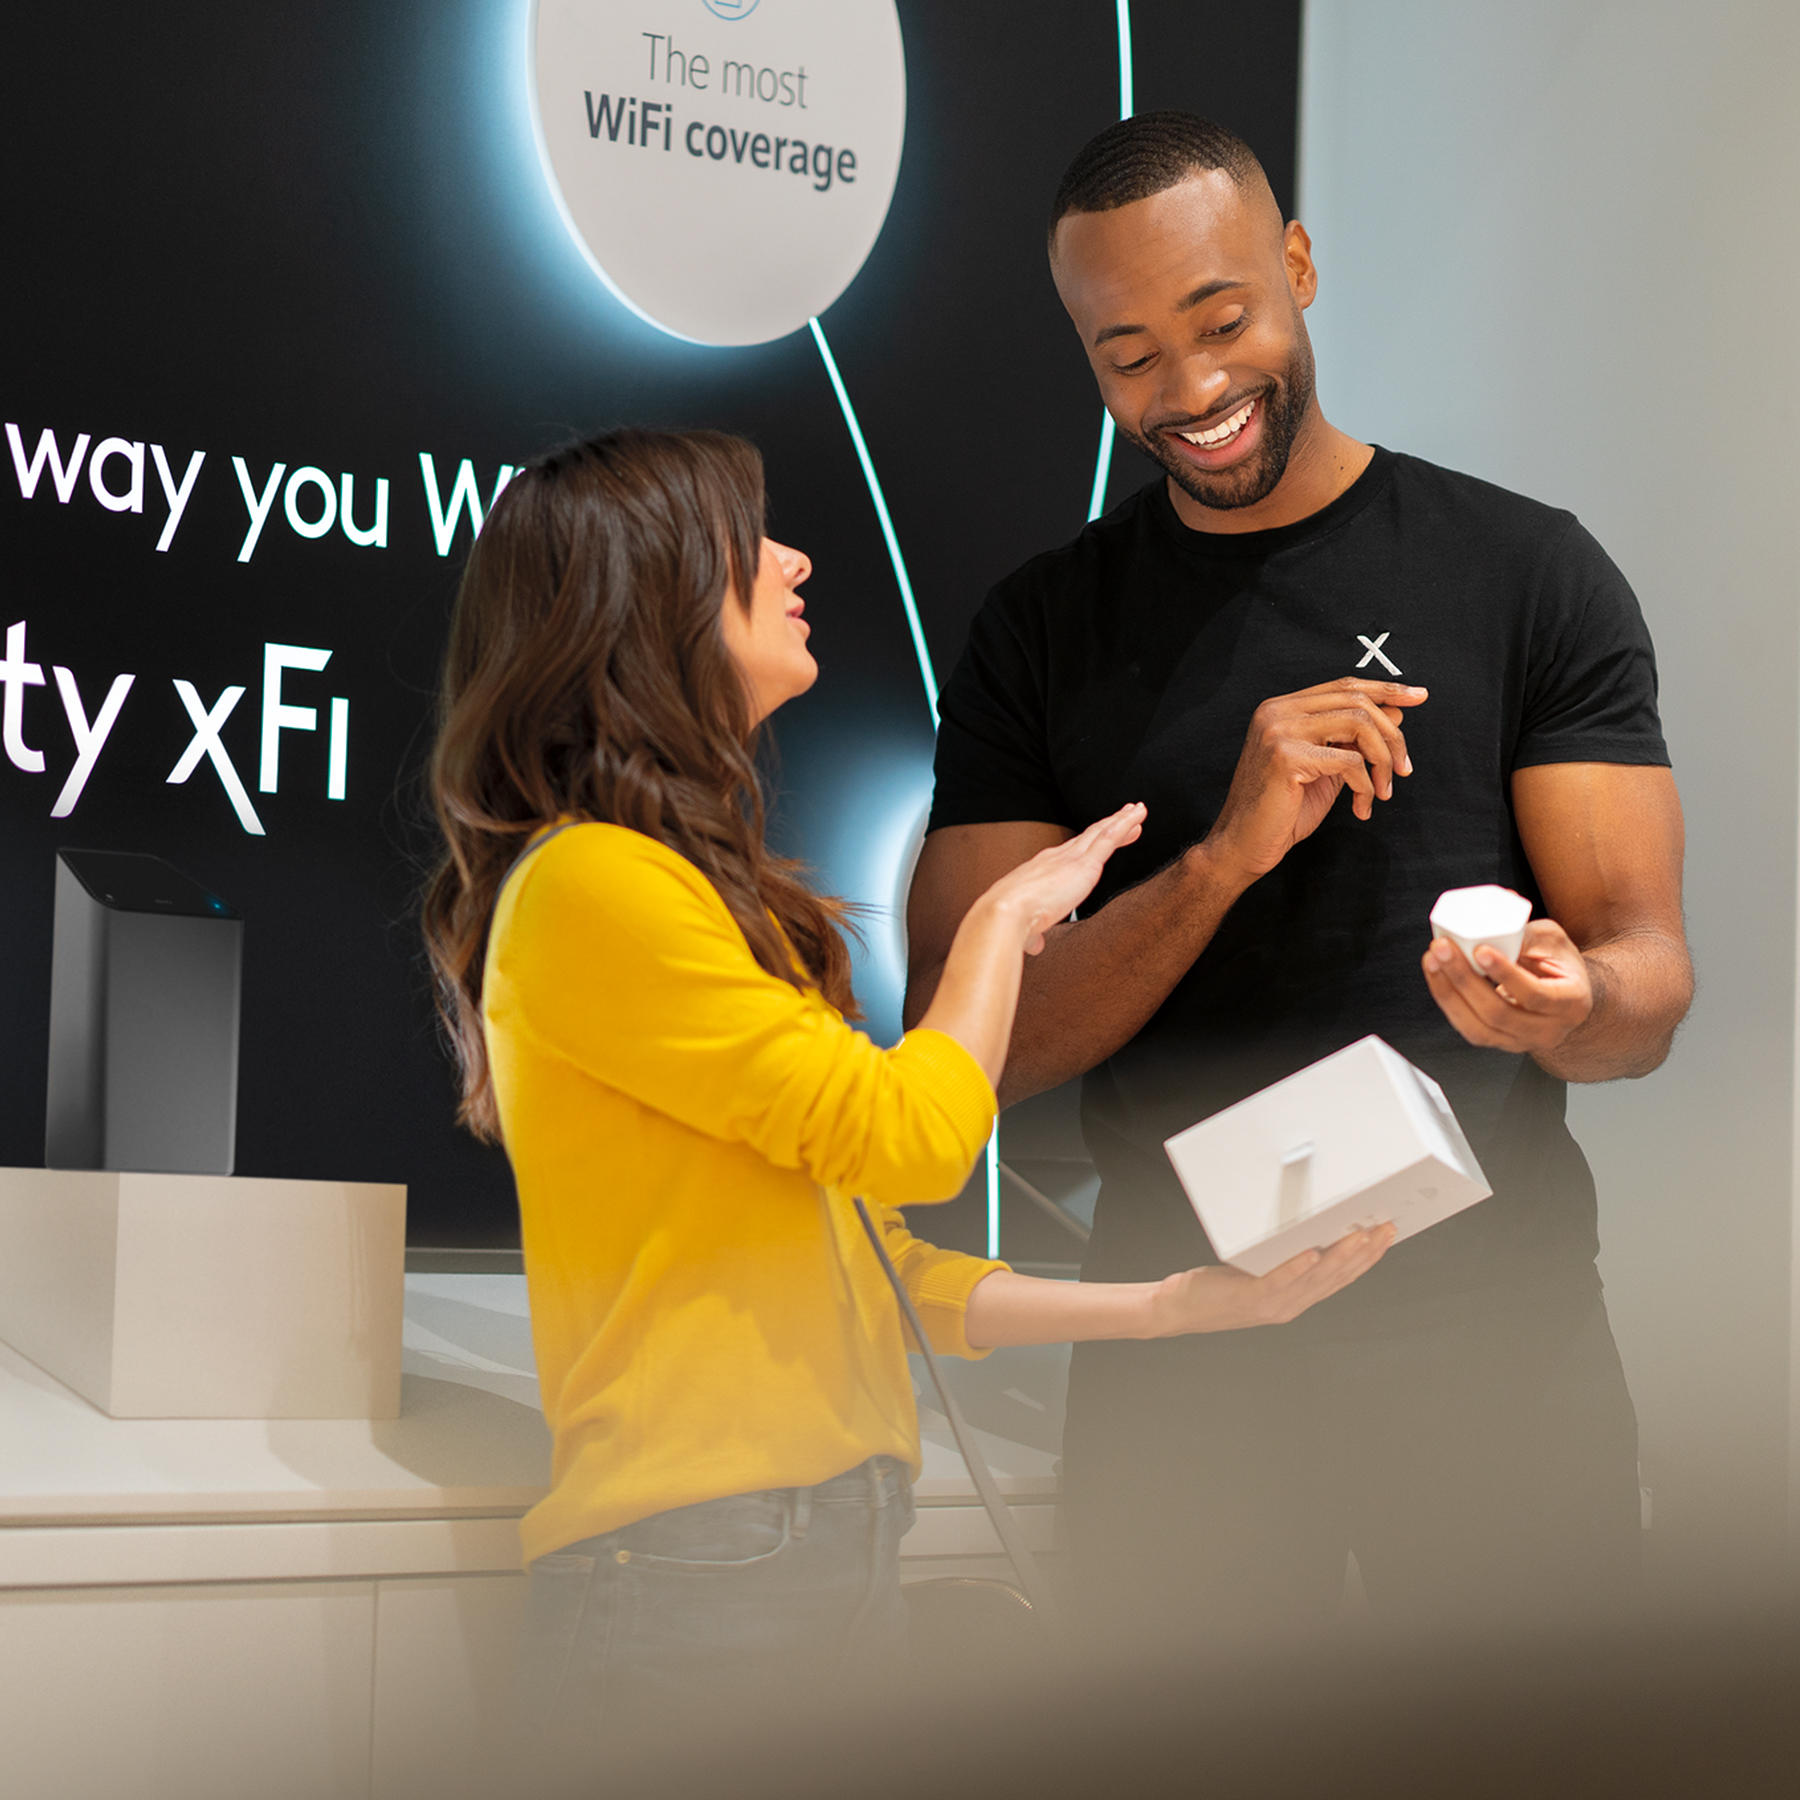 Xfinity Store by Comcast Branded Partner Coupons near me in Dekalb, IL 60115 | 8coupons